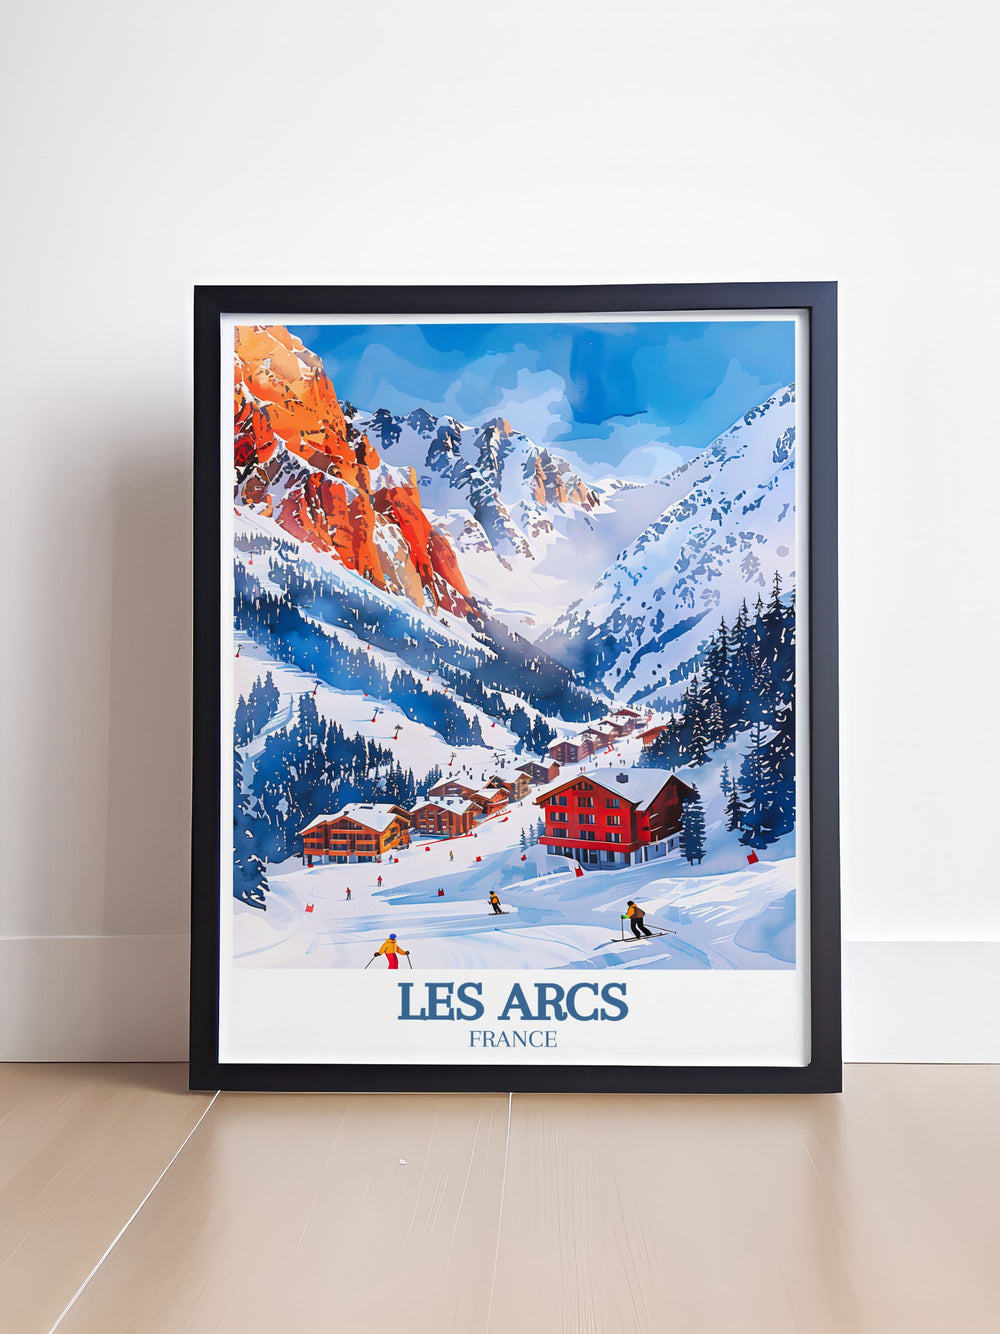 Aiguille Rouge Mont Blanc stunning living room decor showcasing the beauty of Les Arcs ideal for modern art collectors and travel enthusiasts seeking unique skiing posters